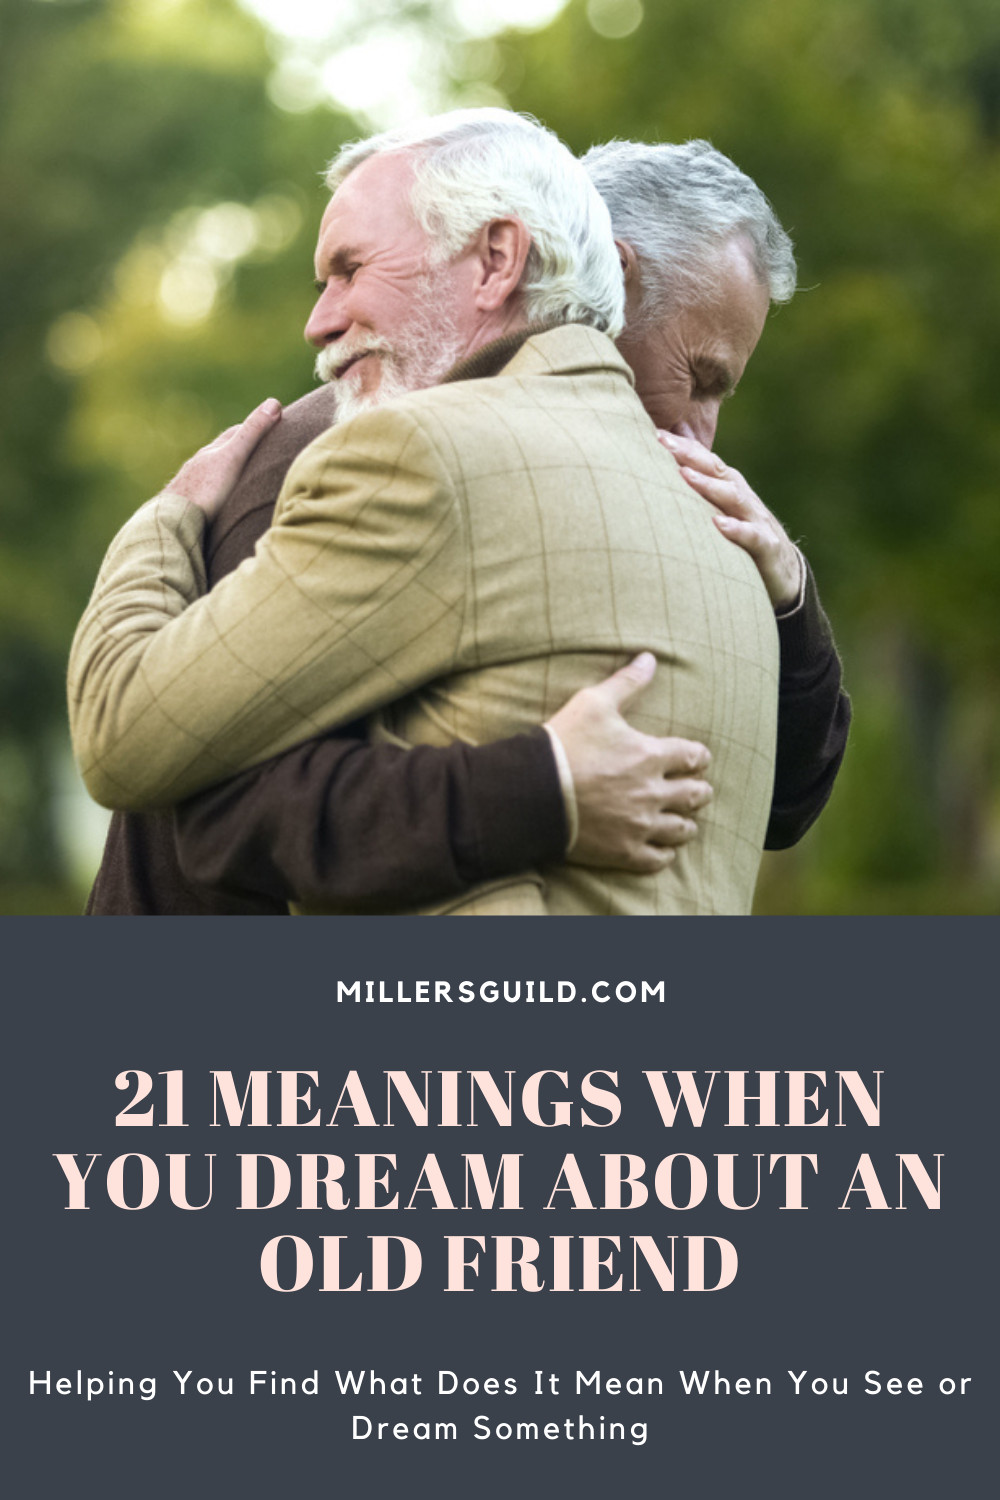 21 Meanings When You Dream About an Old Friend 2